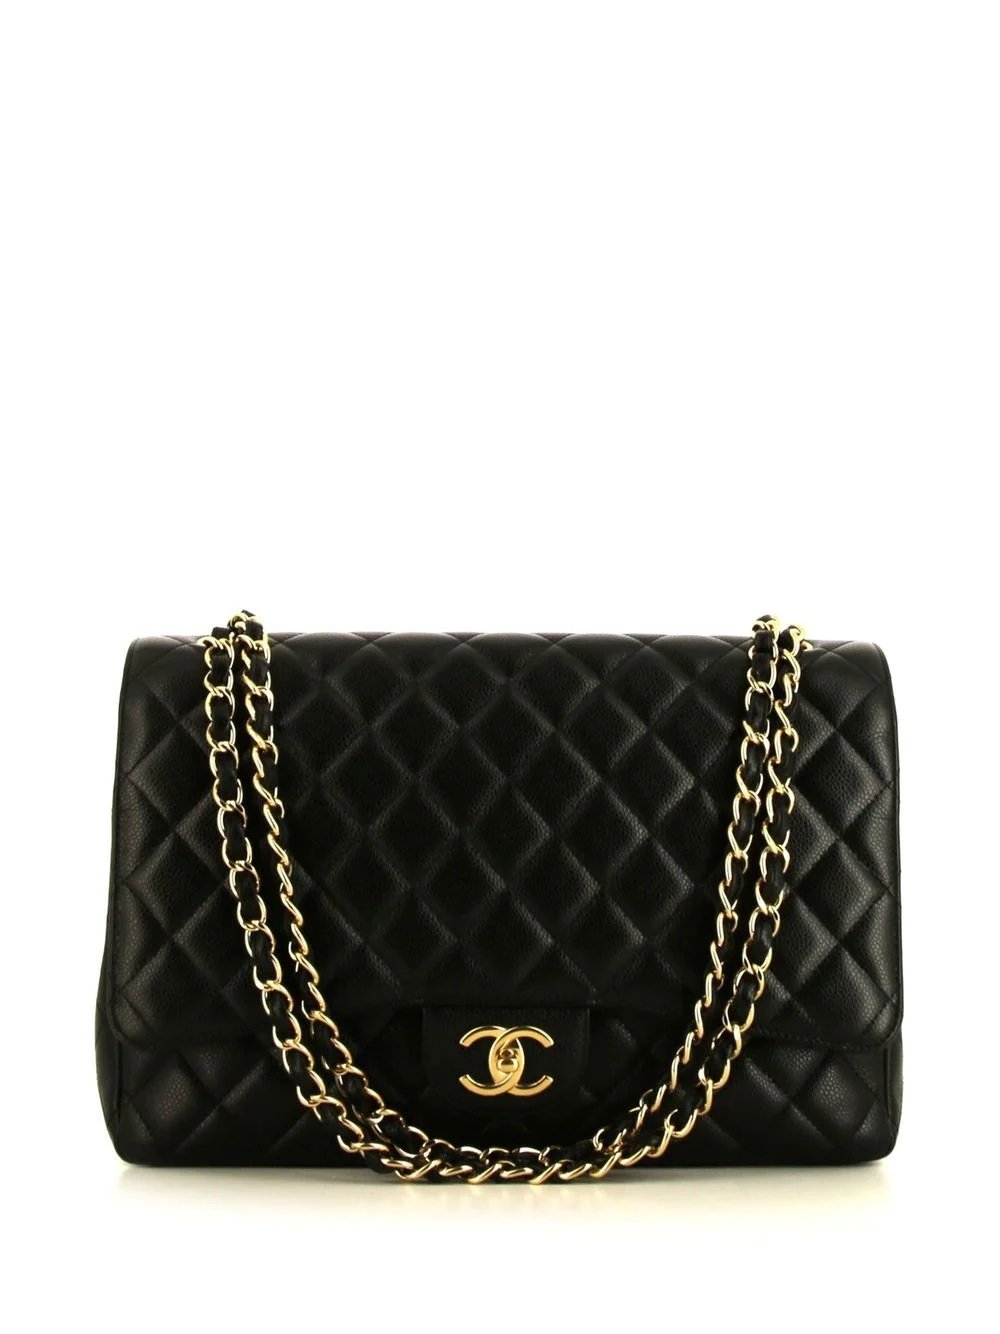 Chanel Maxi Flap Bag in Black Quilted Leather and Gold Hardware.jpg